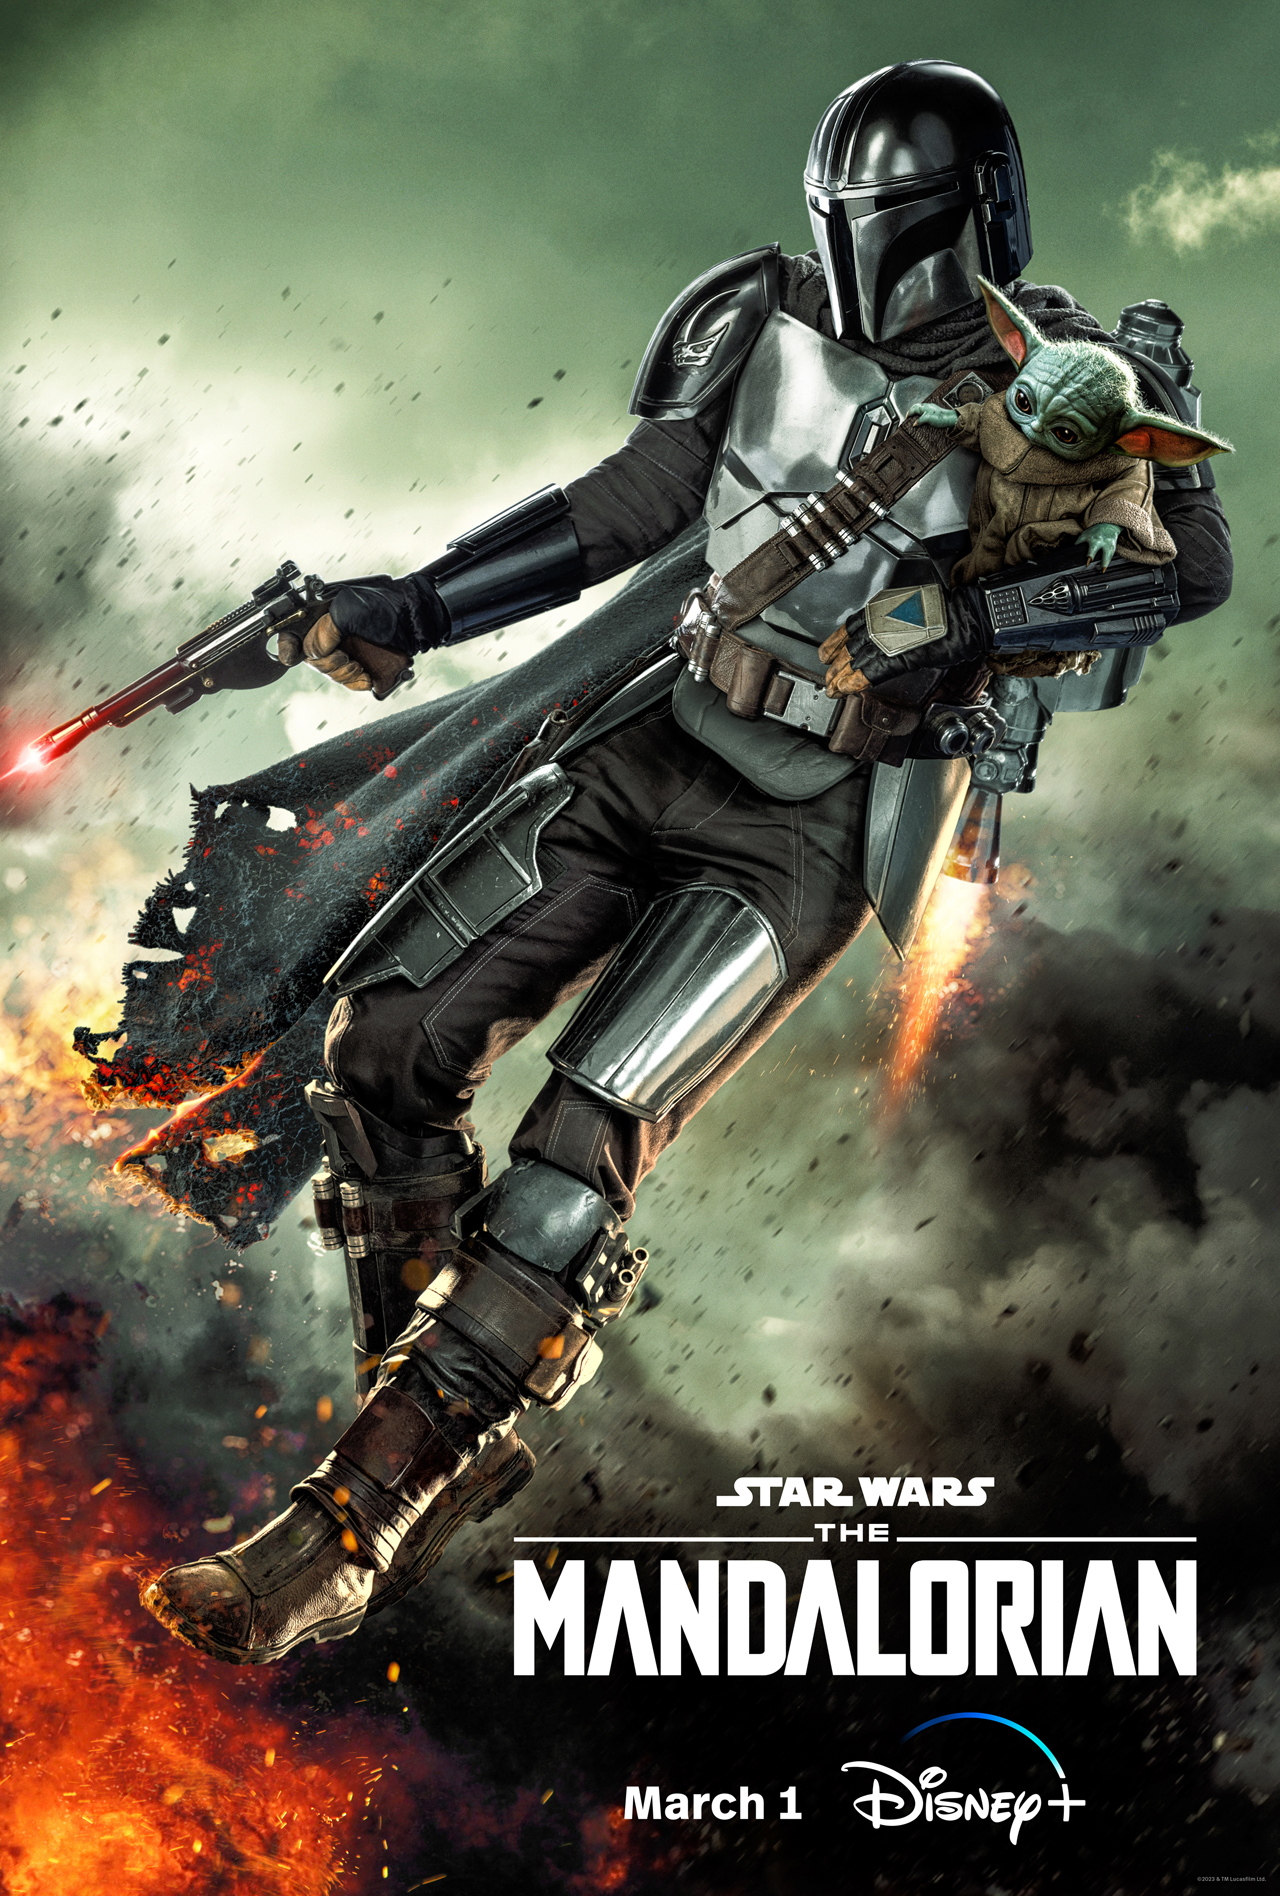 The new season of The Mandalorian is here